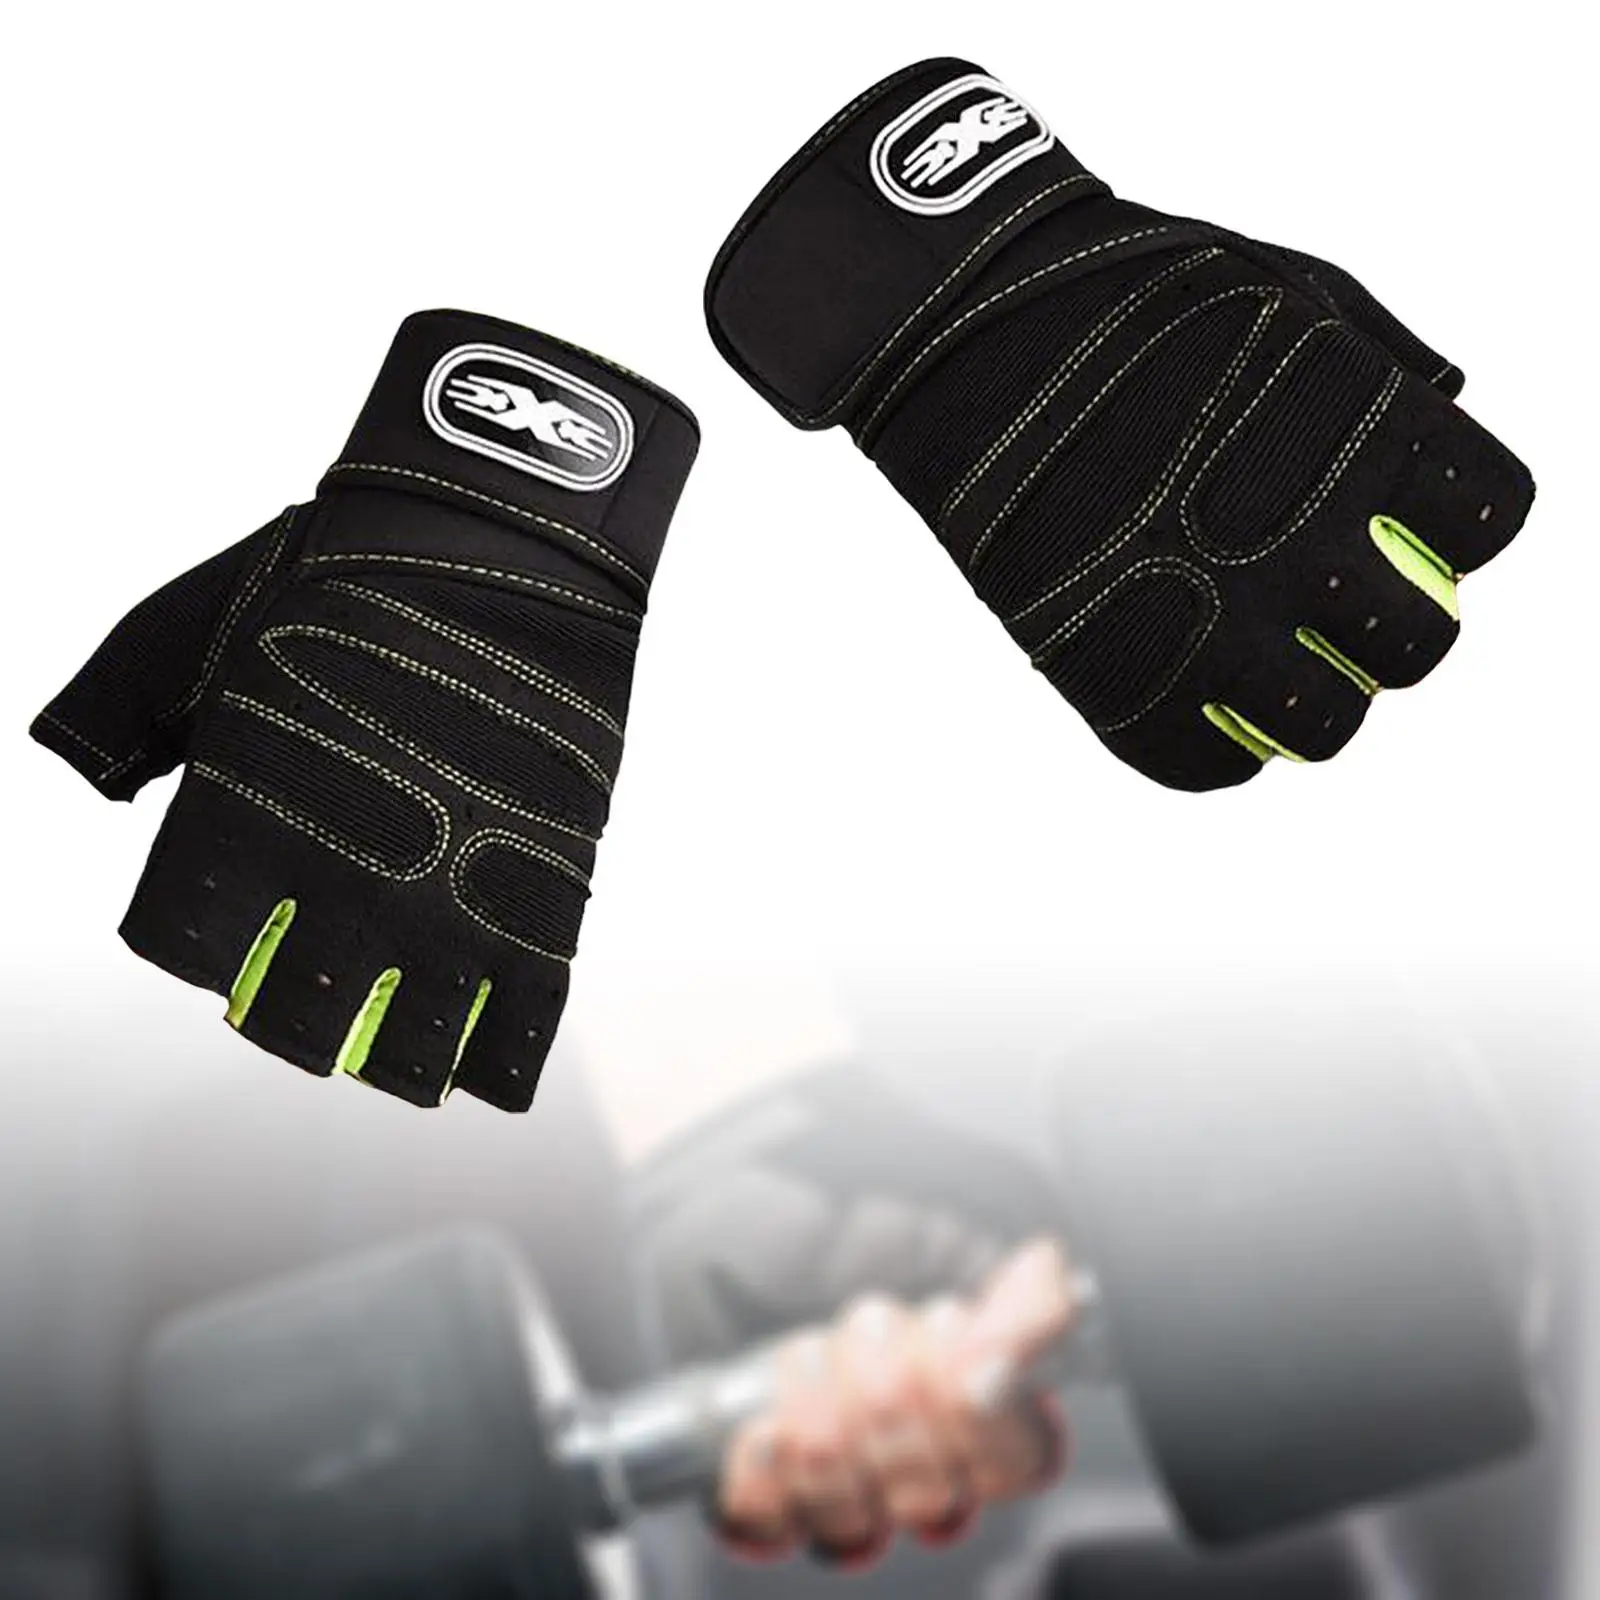 Weight Lifting Gloves Nonslip Wrist Support Training Gloves Gym Gloves for